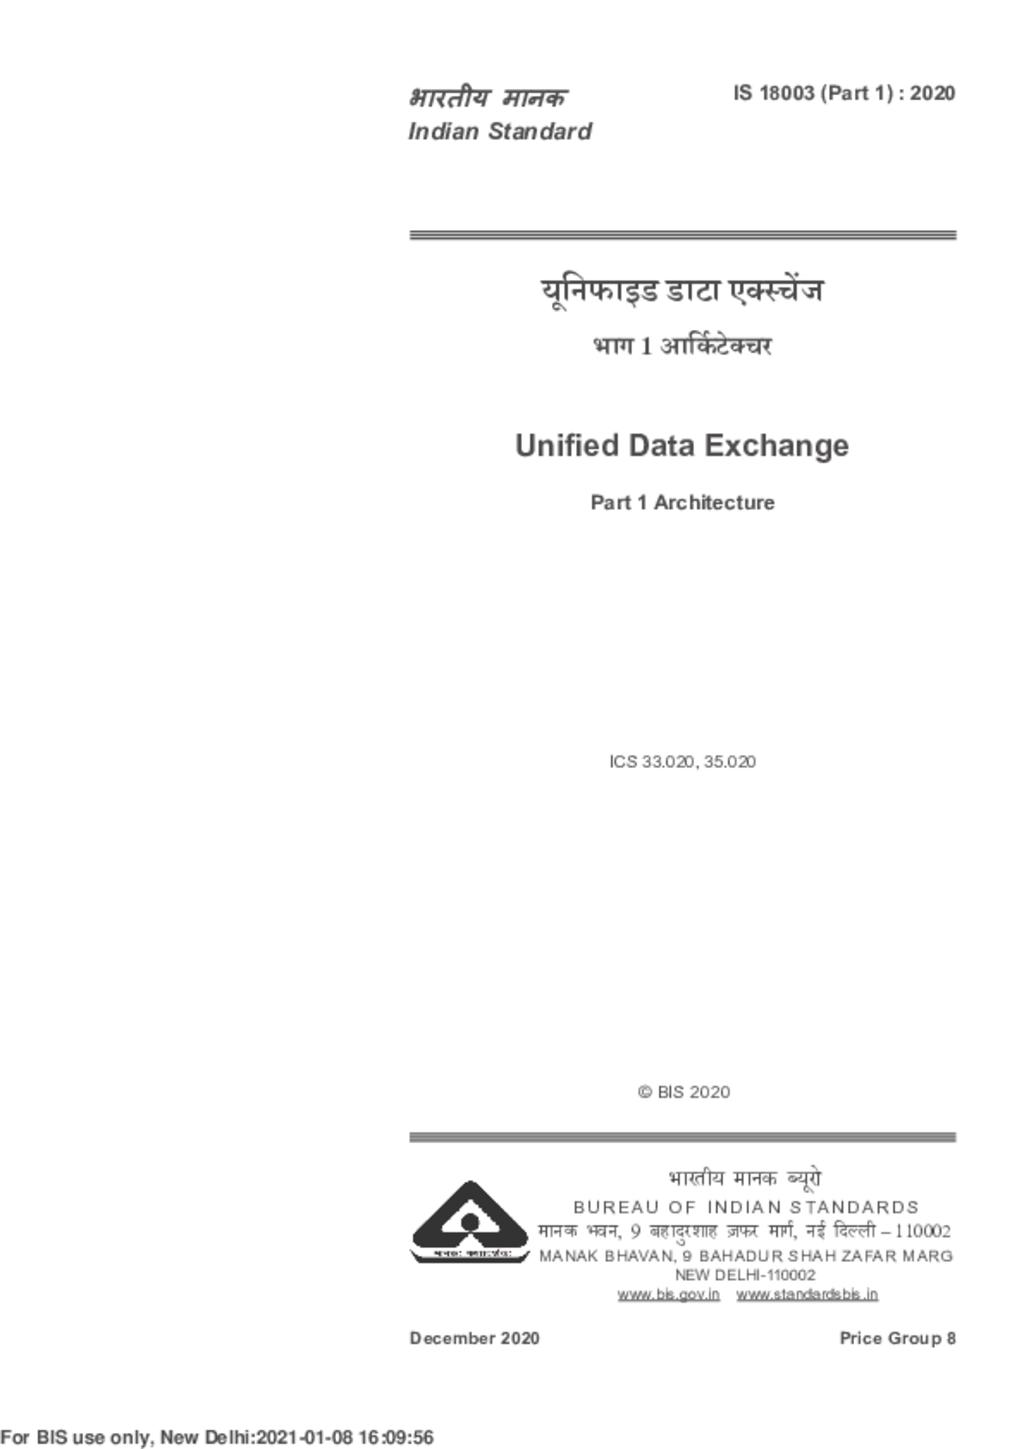 IS 18003-1:2020 Unified Data Exchange Part 1 Architecture